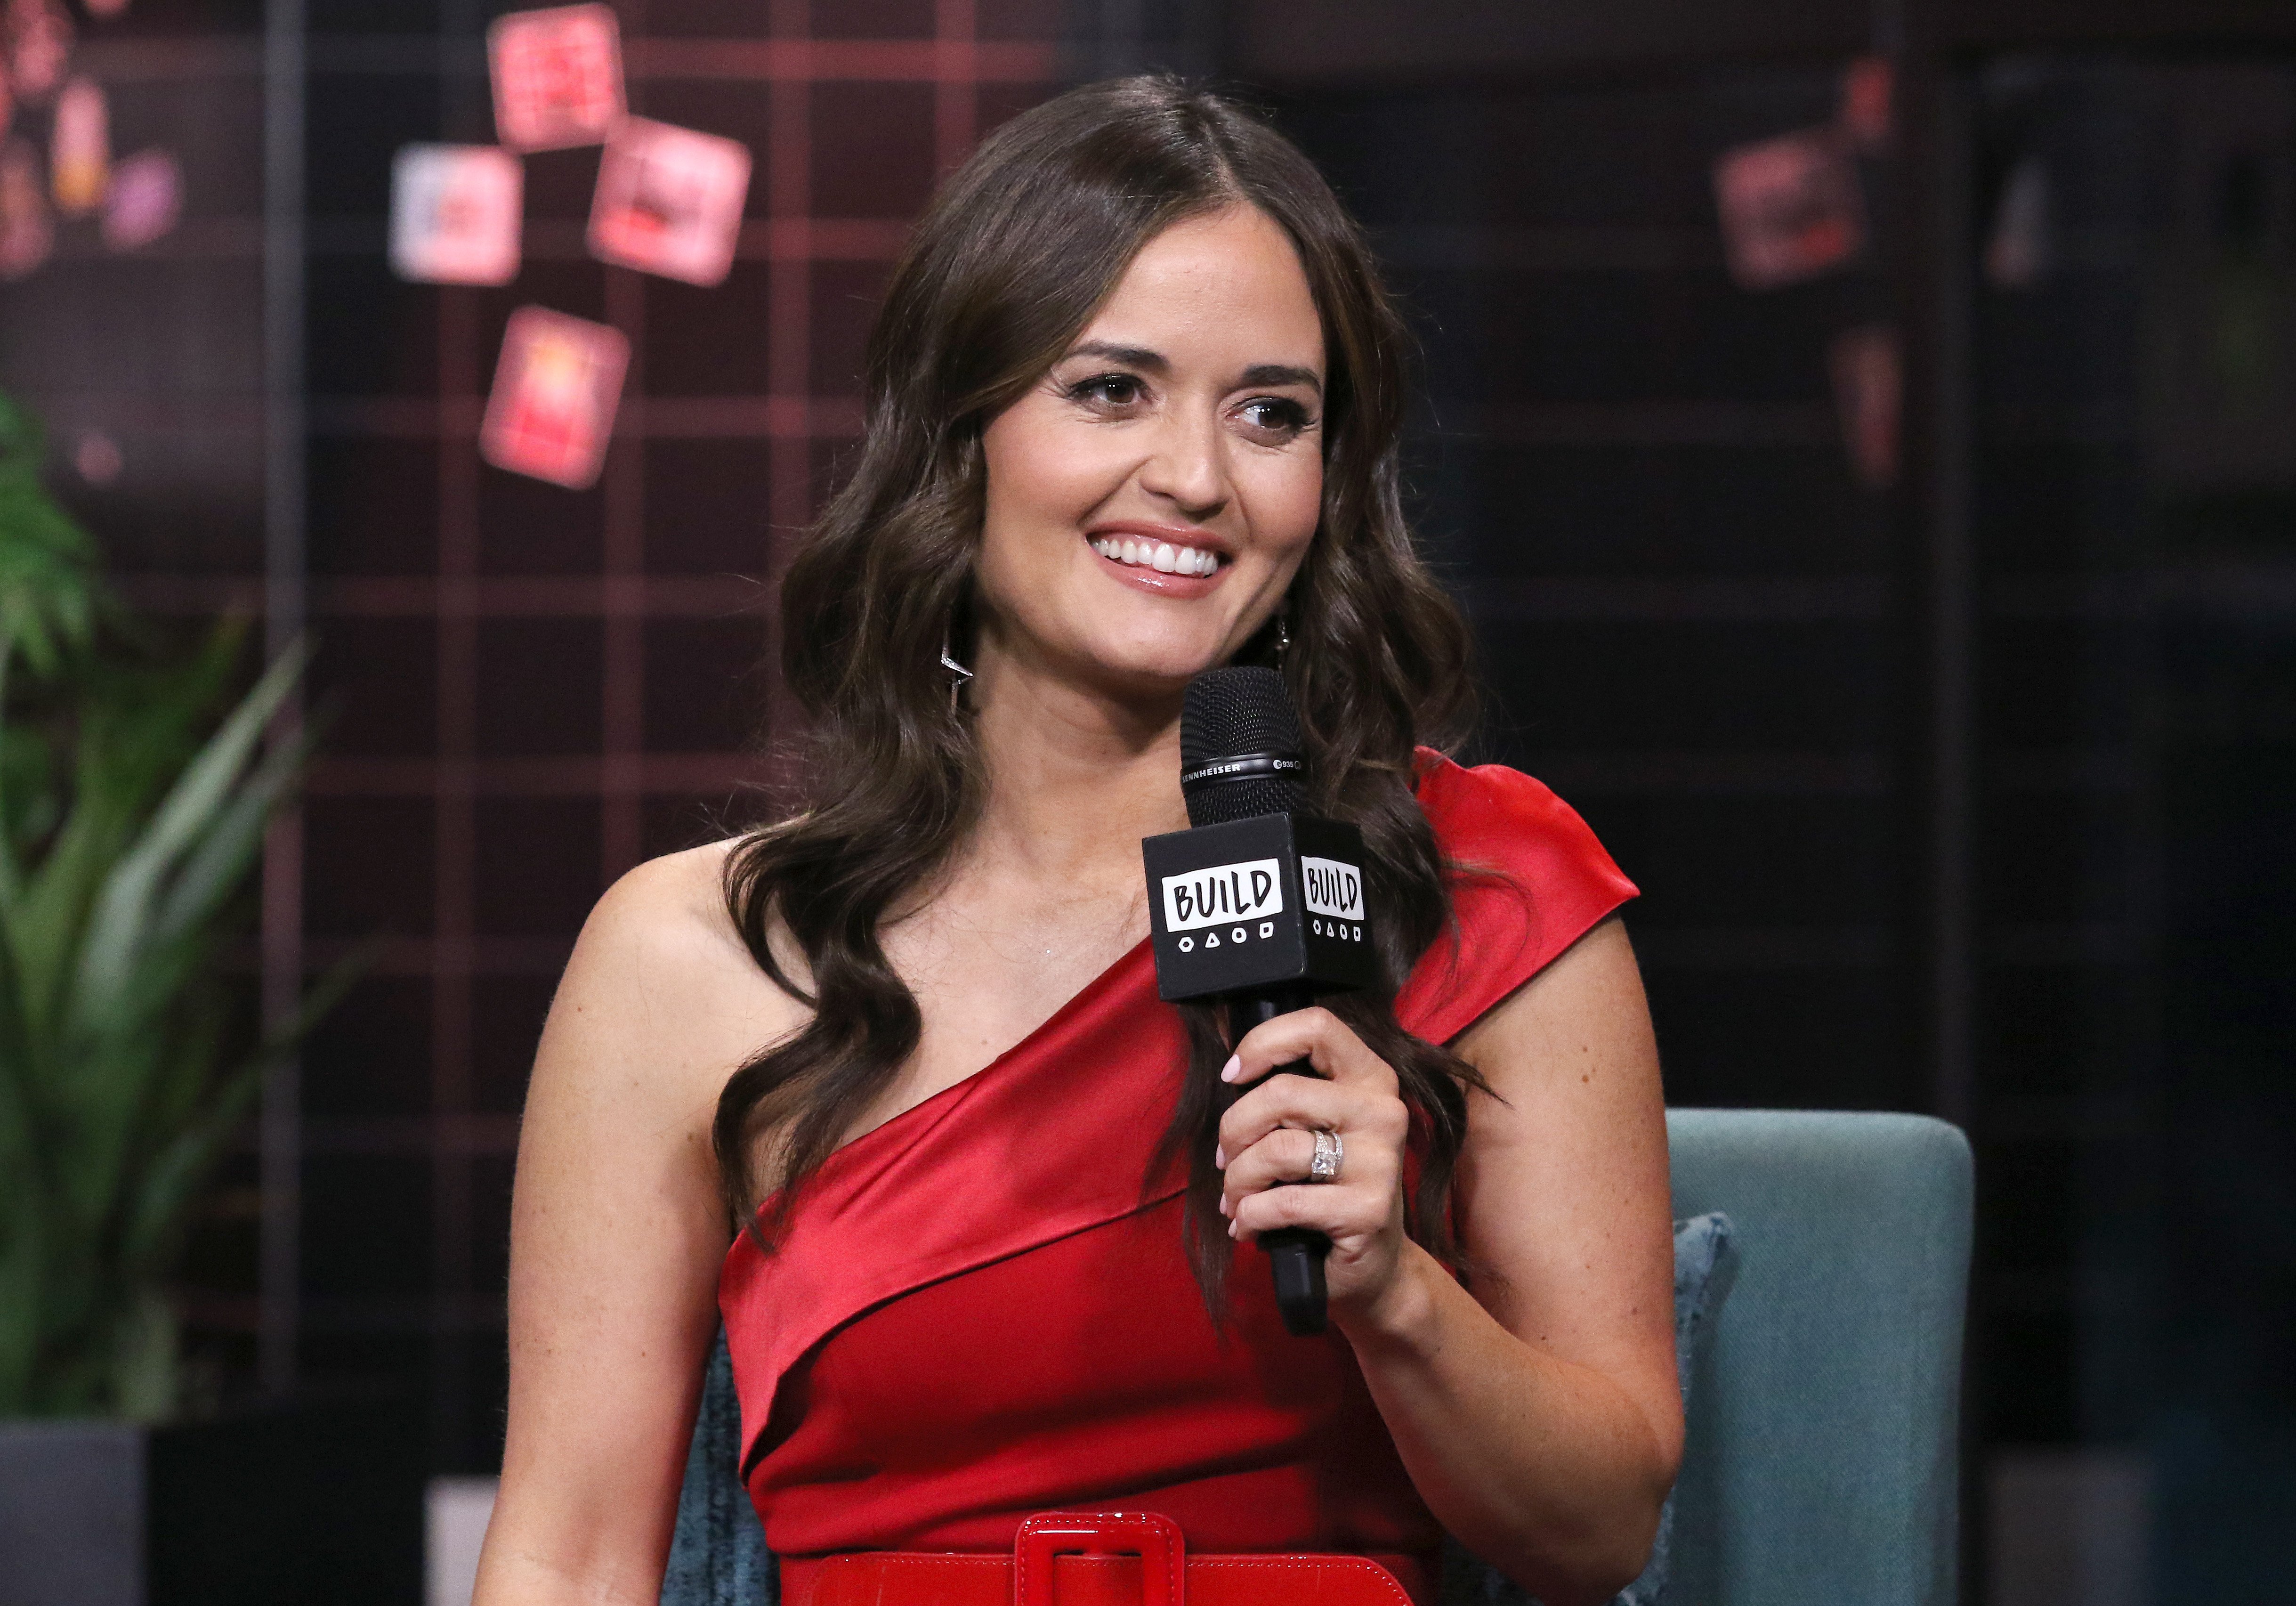 Danica McKellar attends the Build Series to discuss "Christmas at Dollywood" at Build Studio on December 04, 2019 | Photo: GettyImages